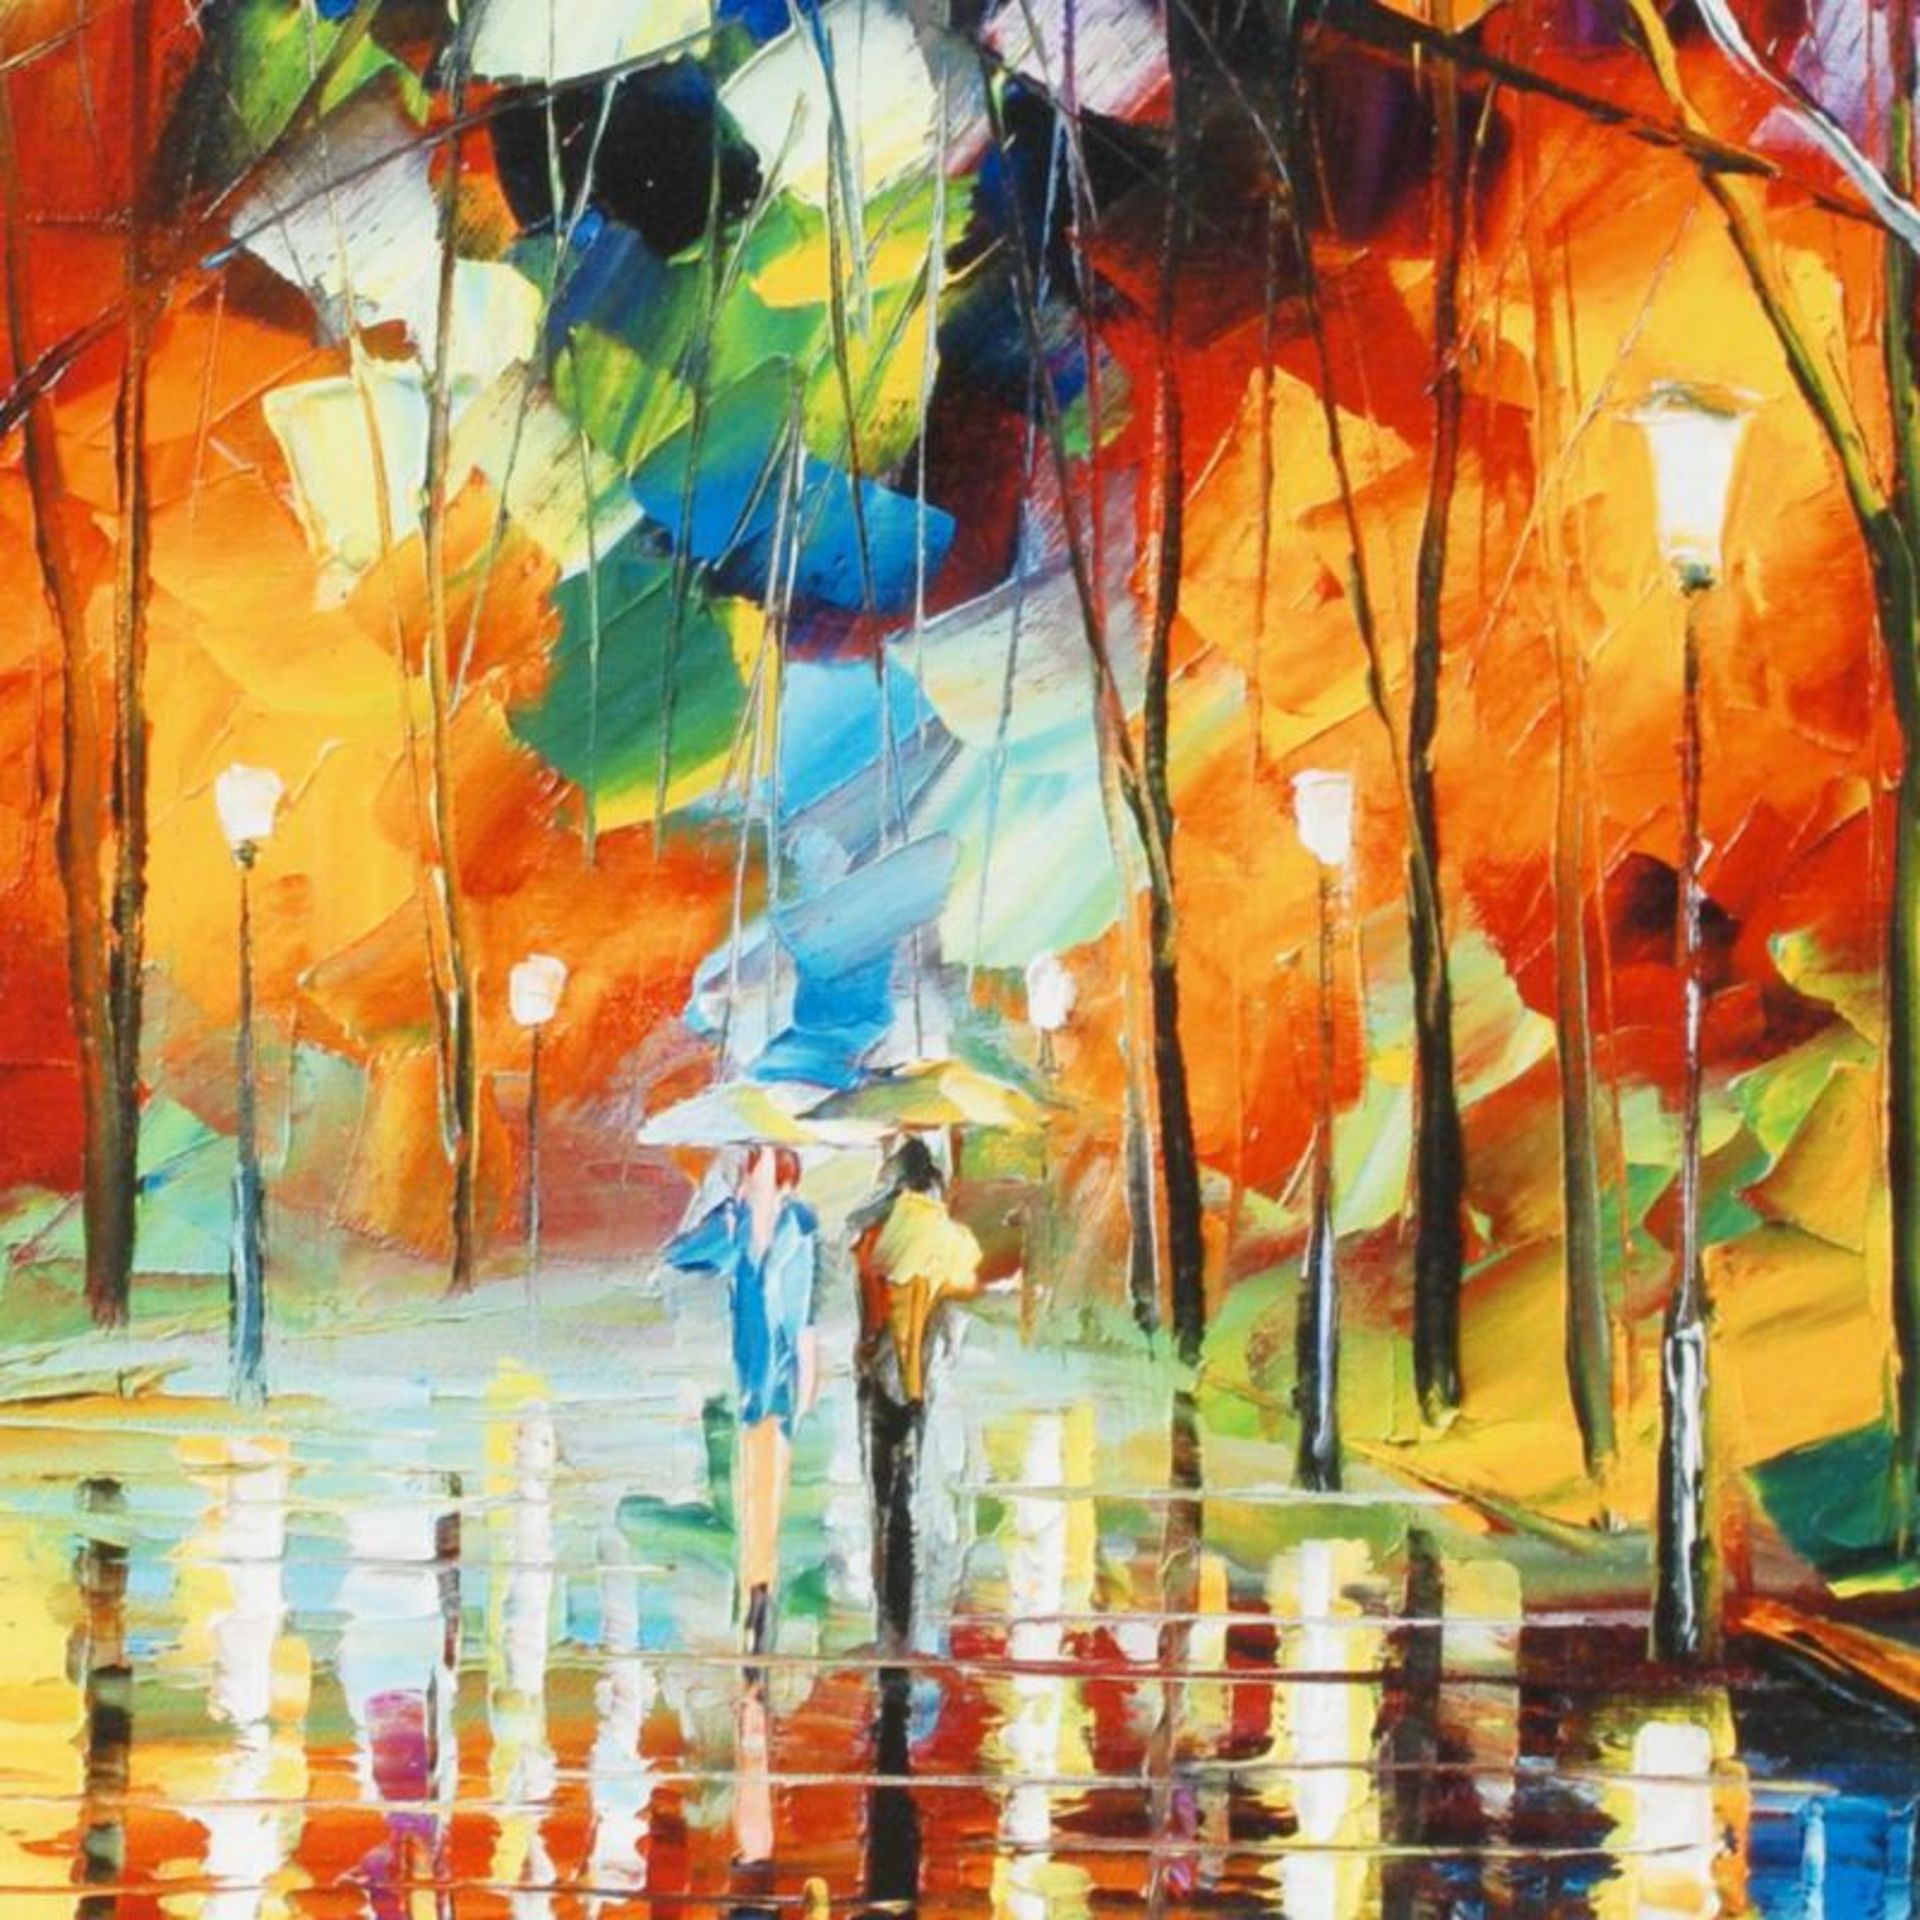 Leonid Afremov (1955-2019) "Mirror Streets" Limited Edition Giclee on Canvas, Nu - Image 2 of 3